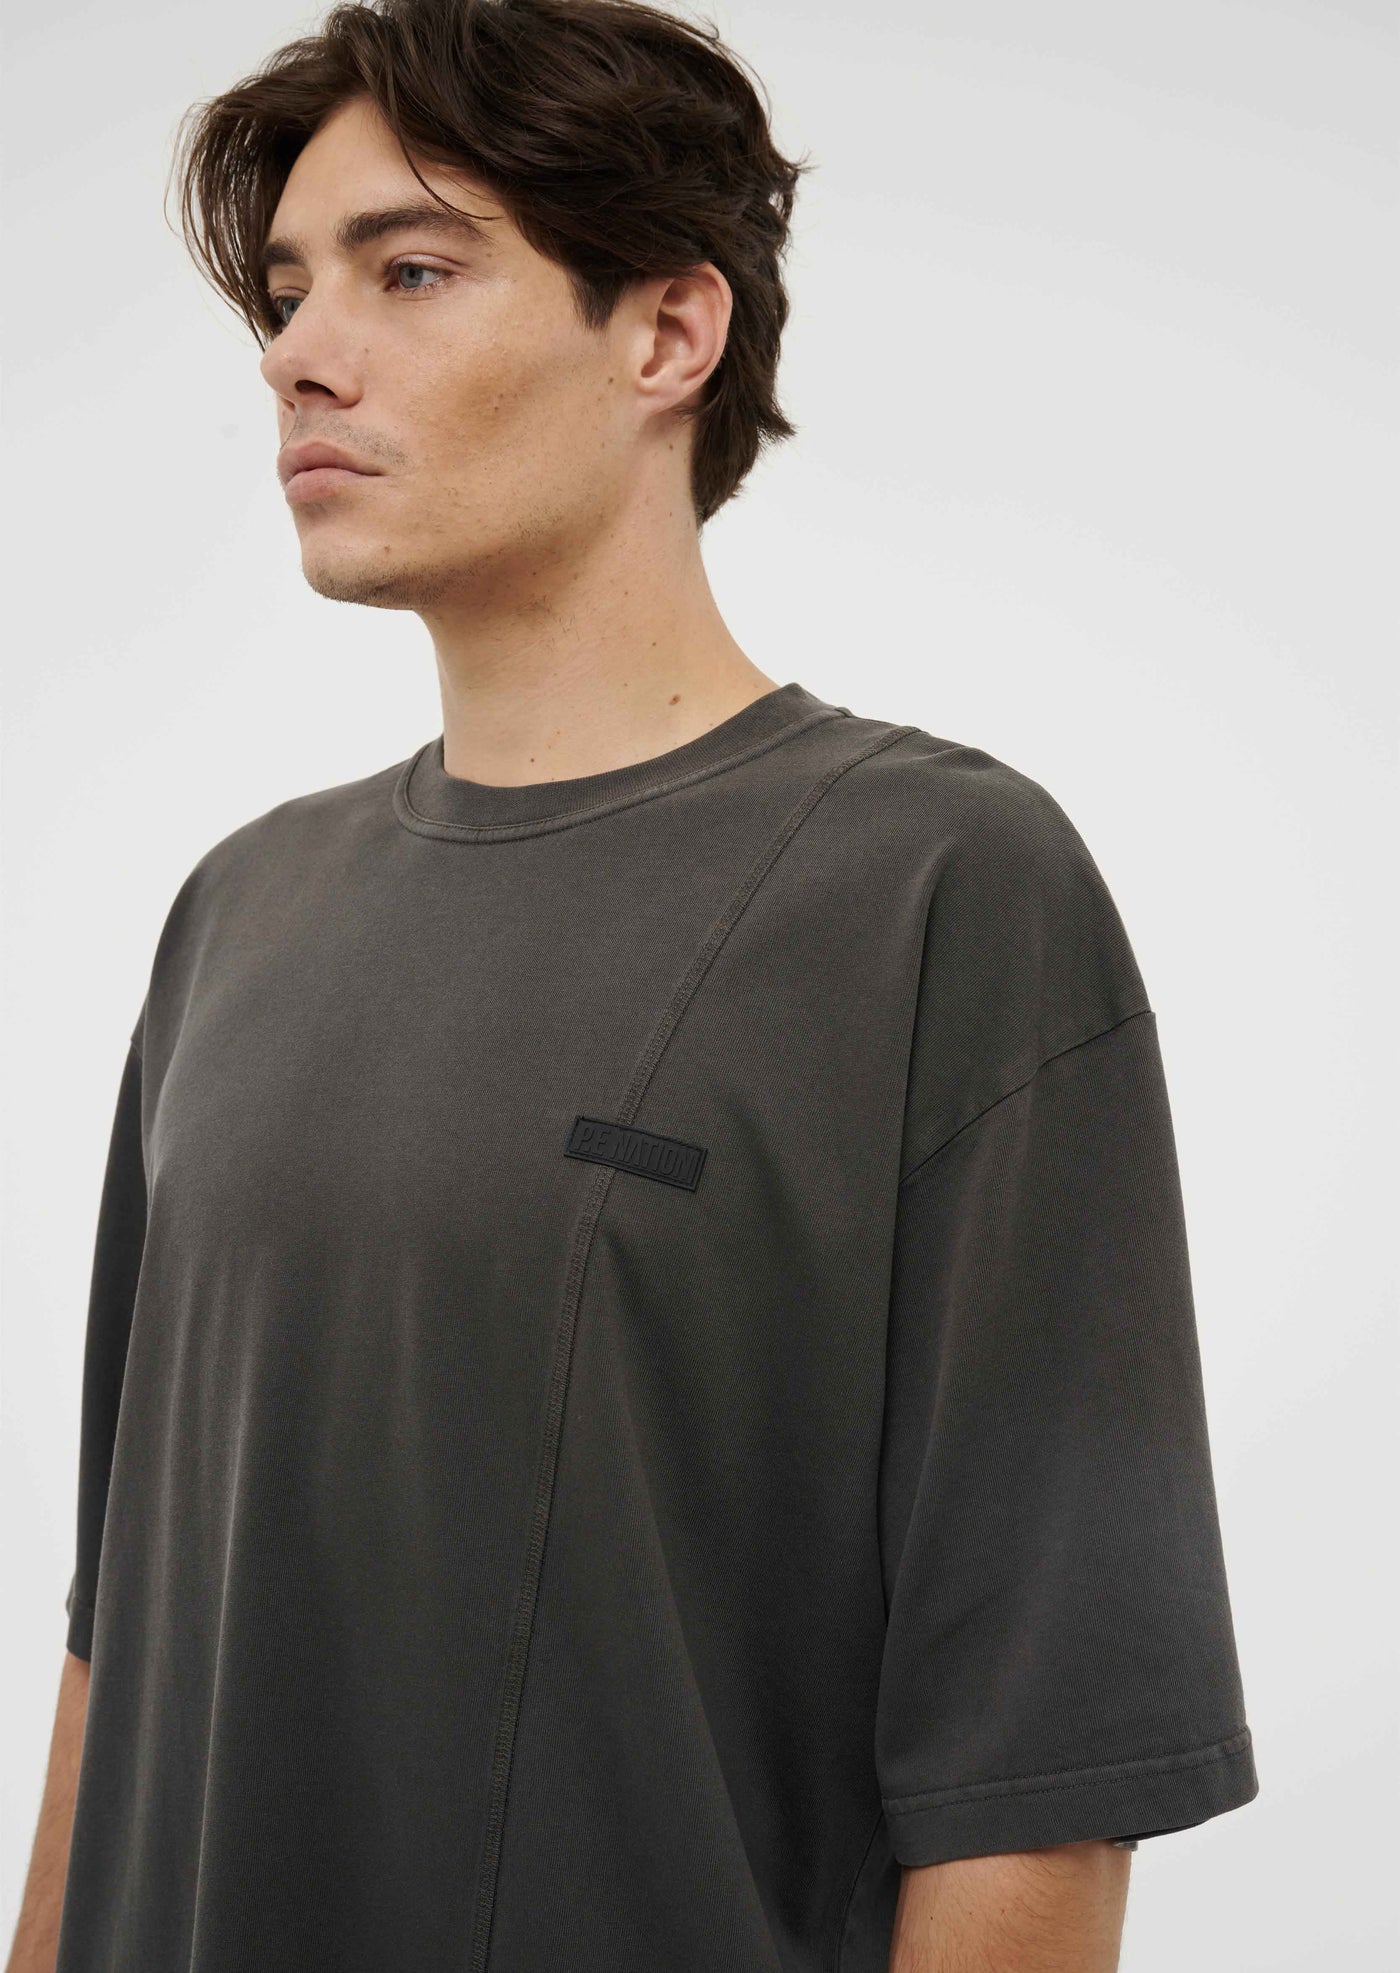 BOUNDARY LINE TEE IN WASHED BLACK